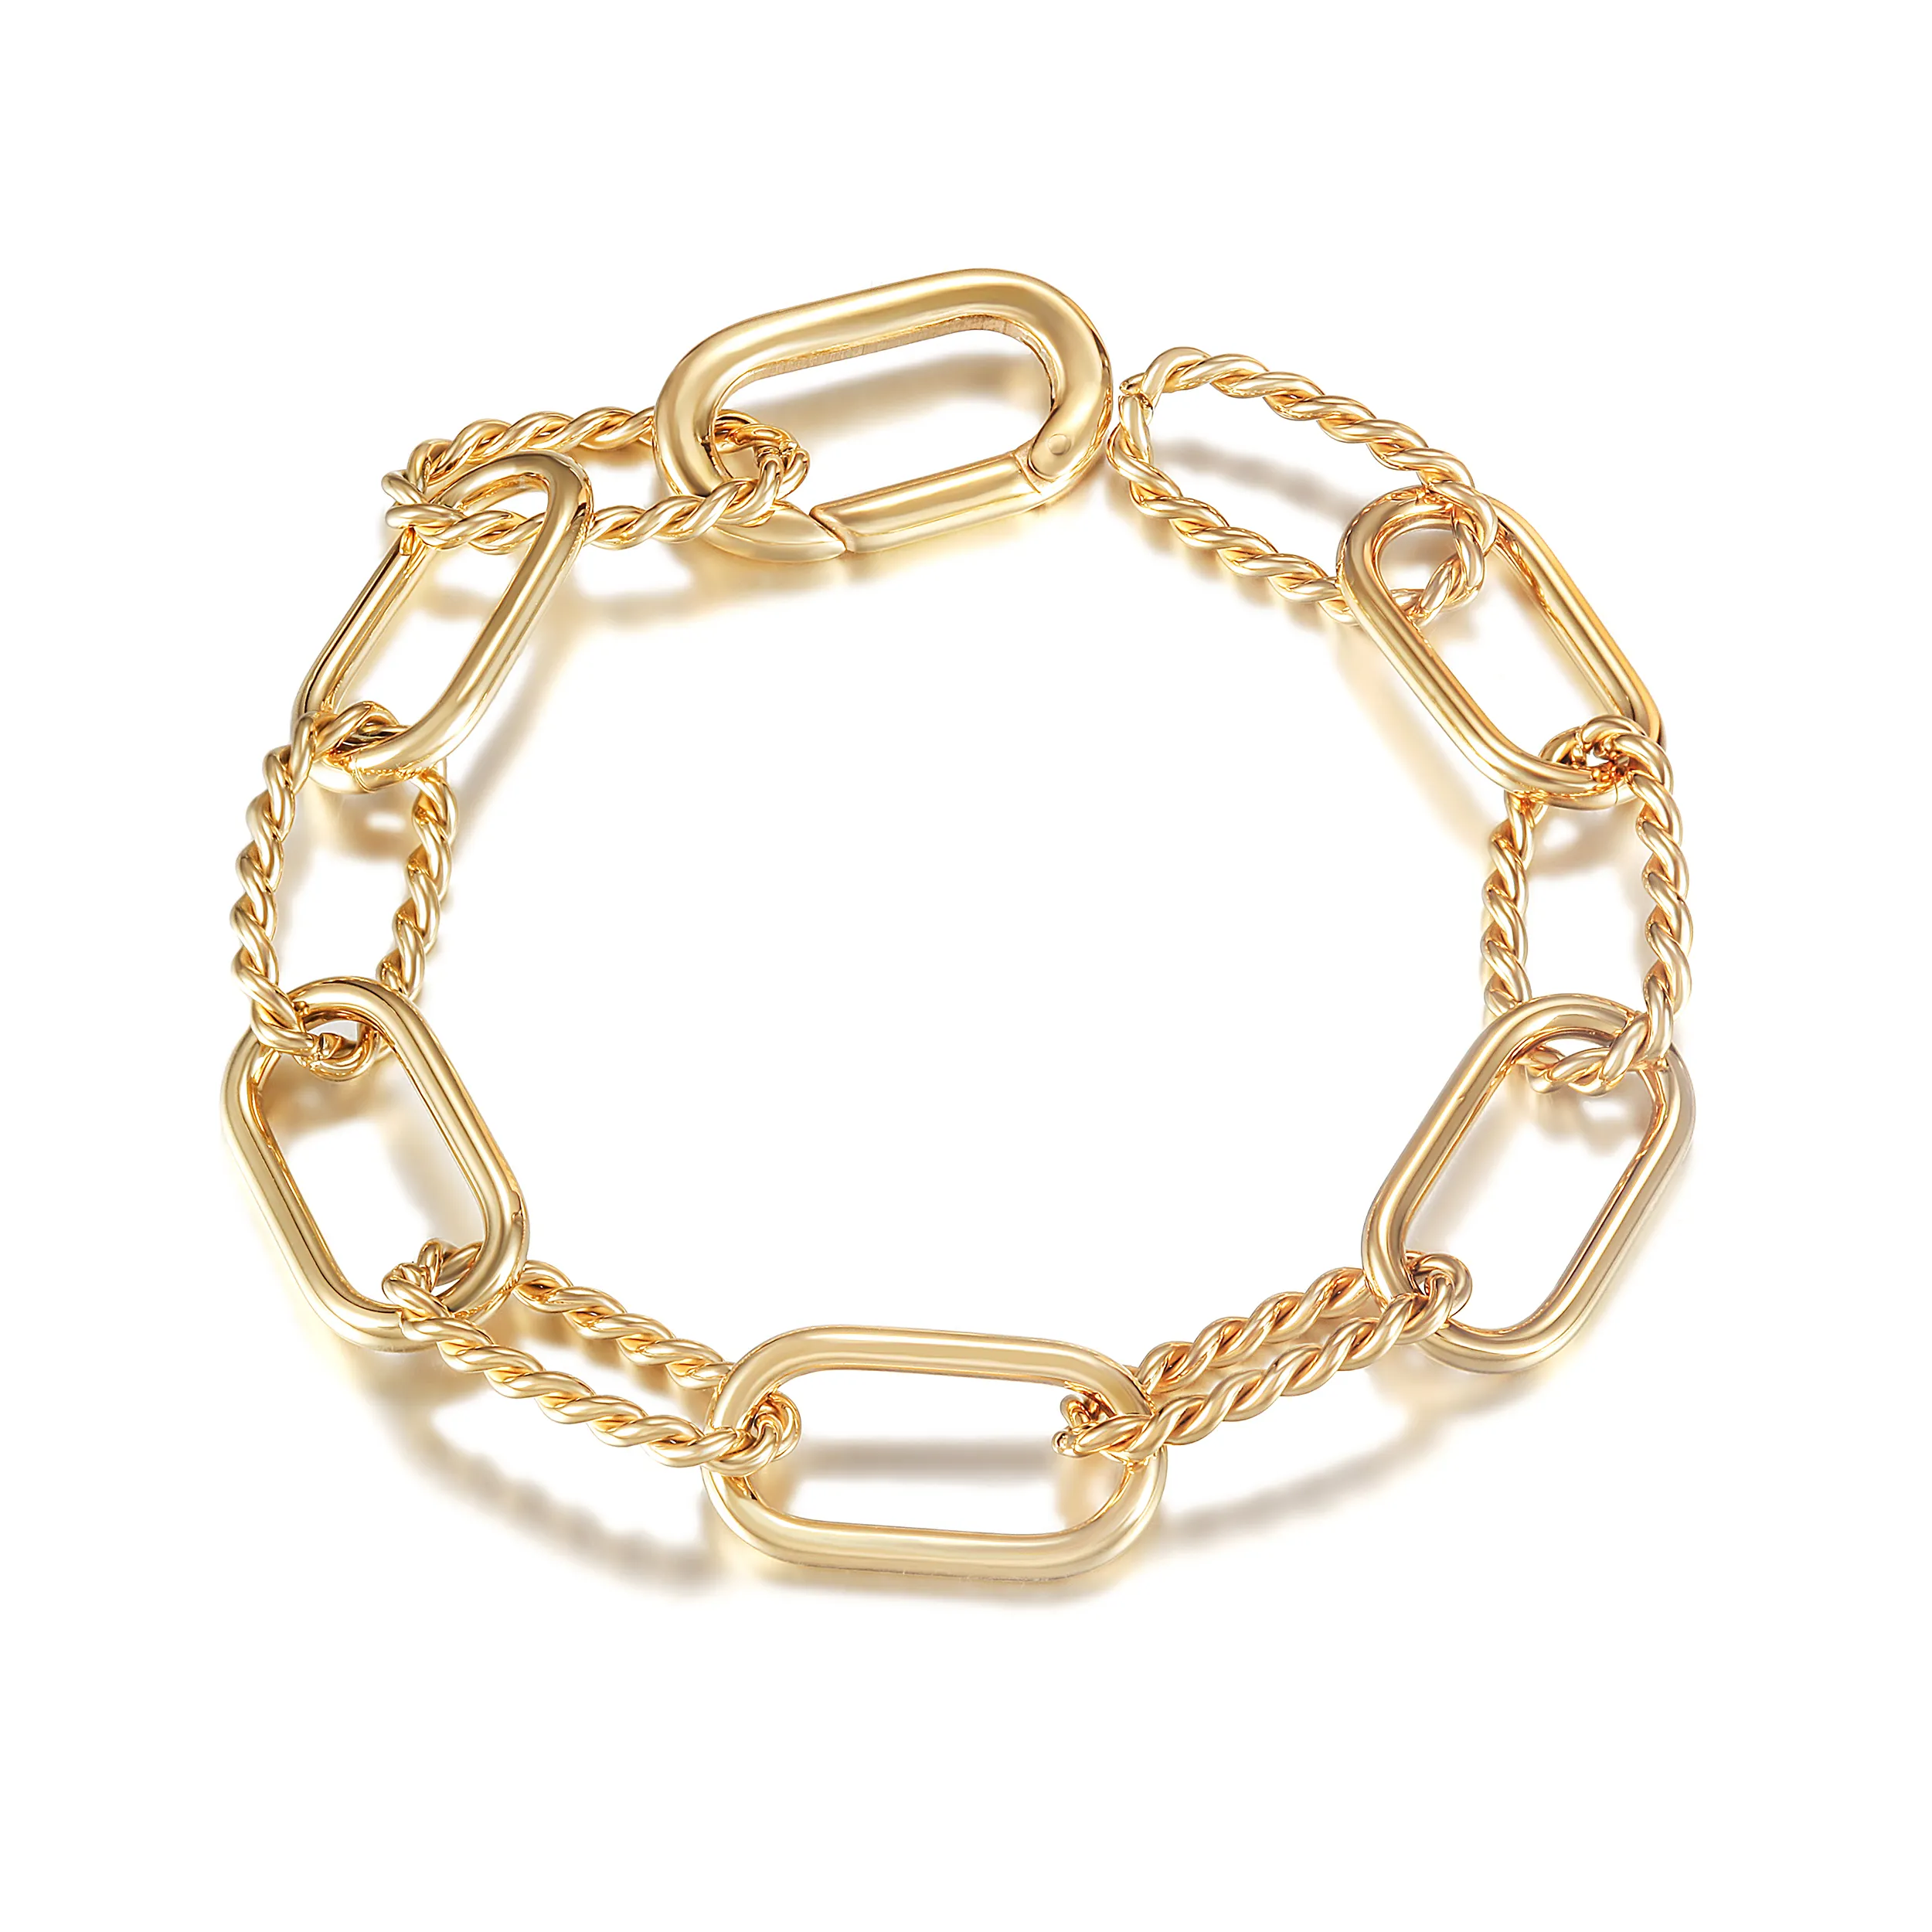 Stainless Steel Fashion Jewelry Twisted interlocking gold plated bracelet